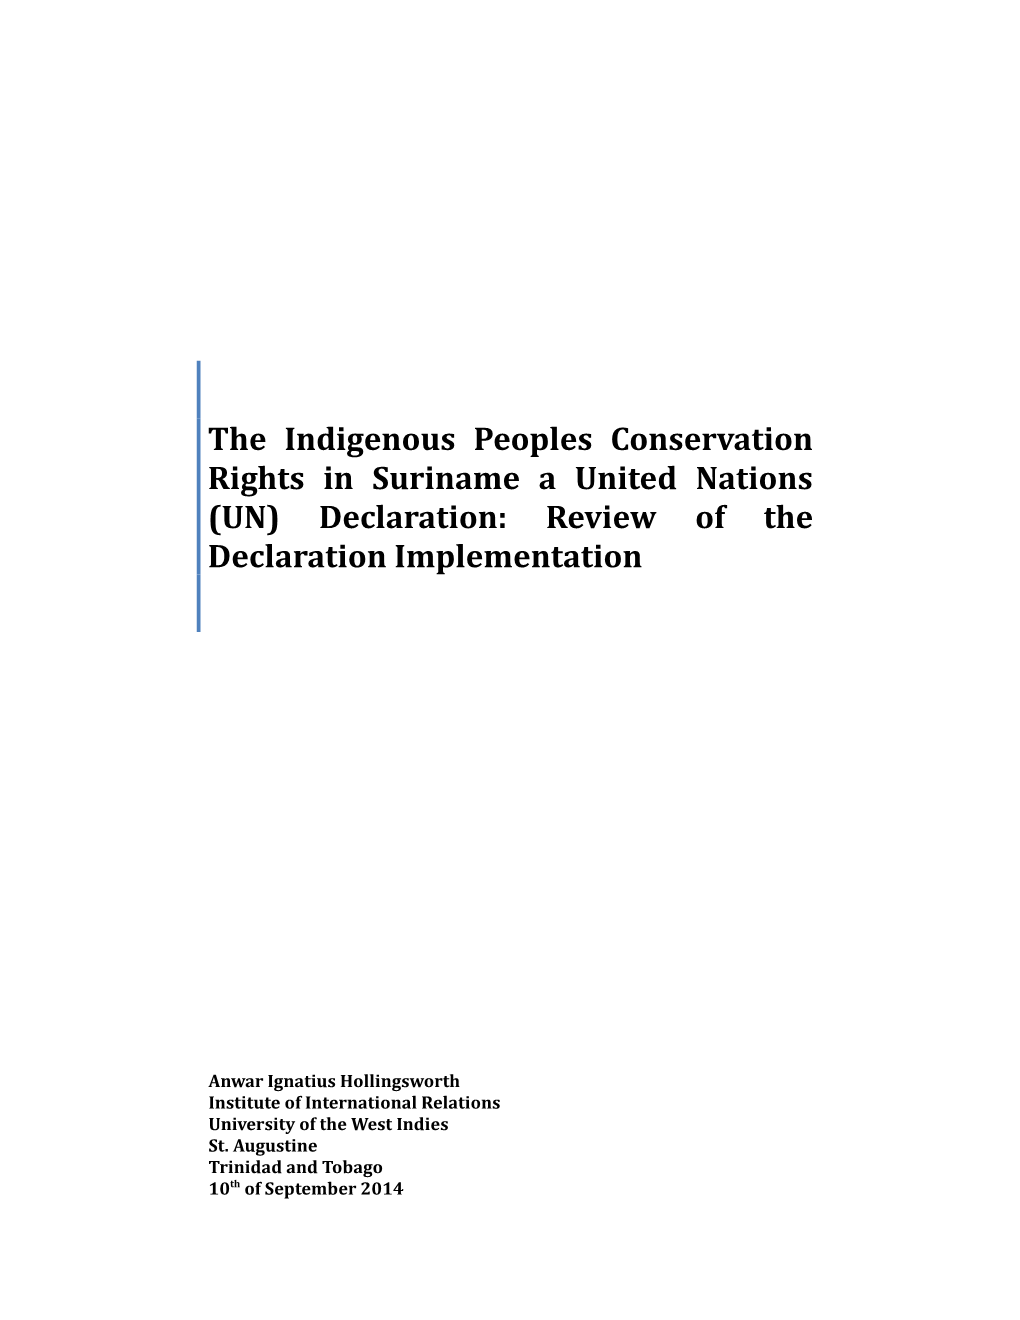 The Indigenous Peoples Conservation Rights in Suriname a United Nations (UN) Declaration: Review of the Declaration Implementation